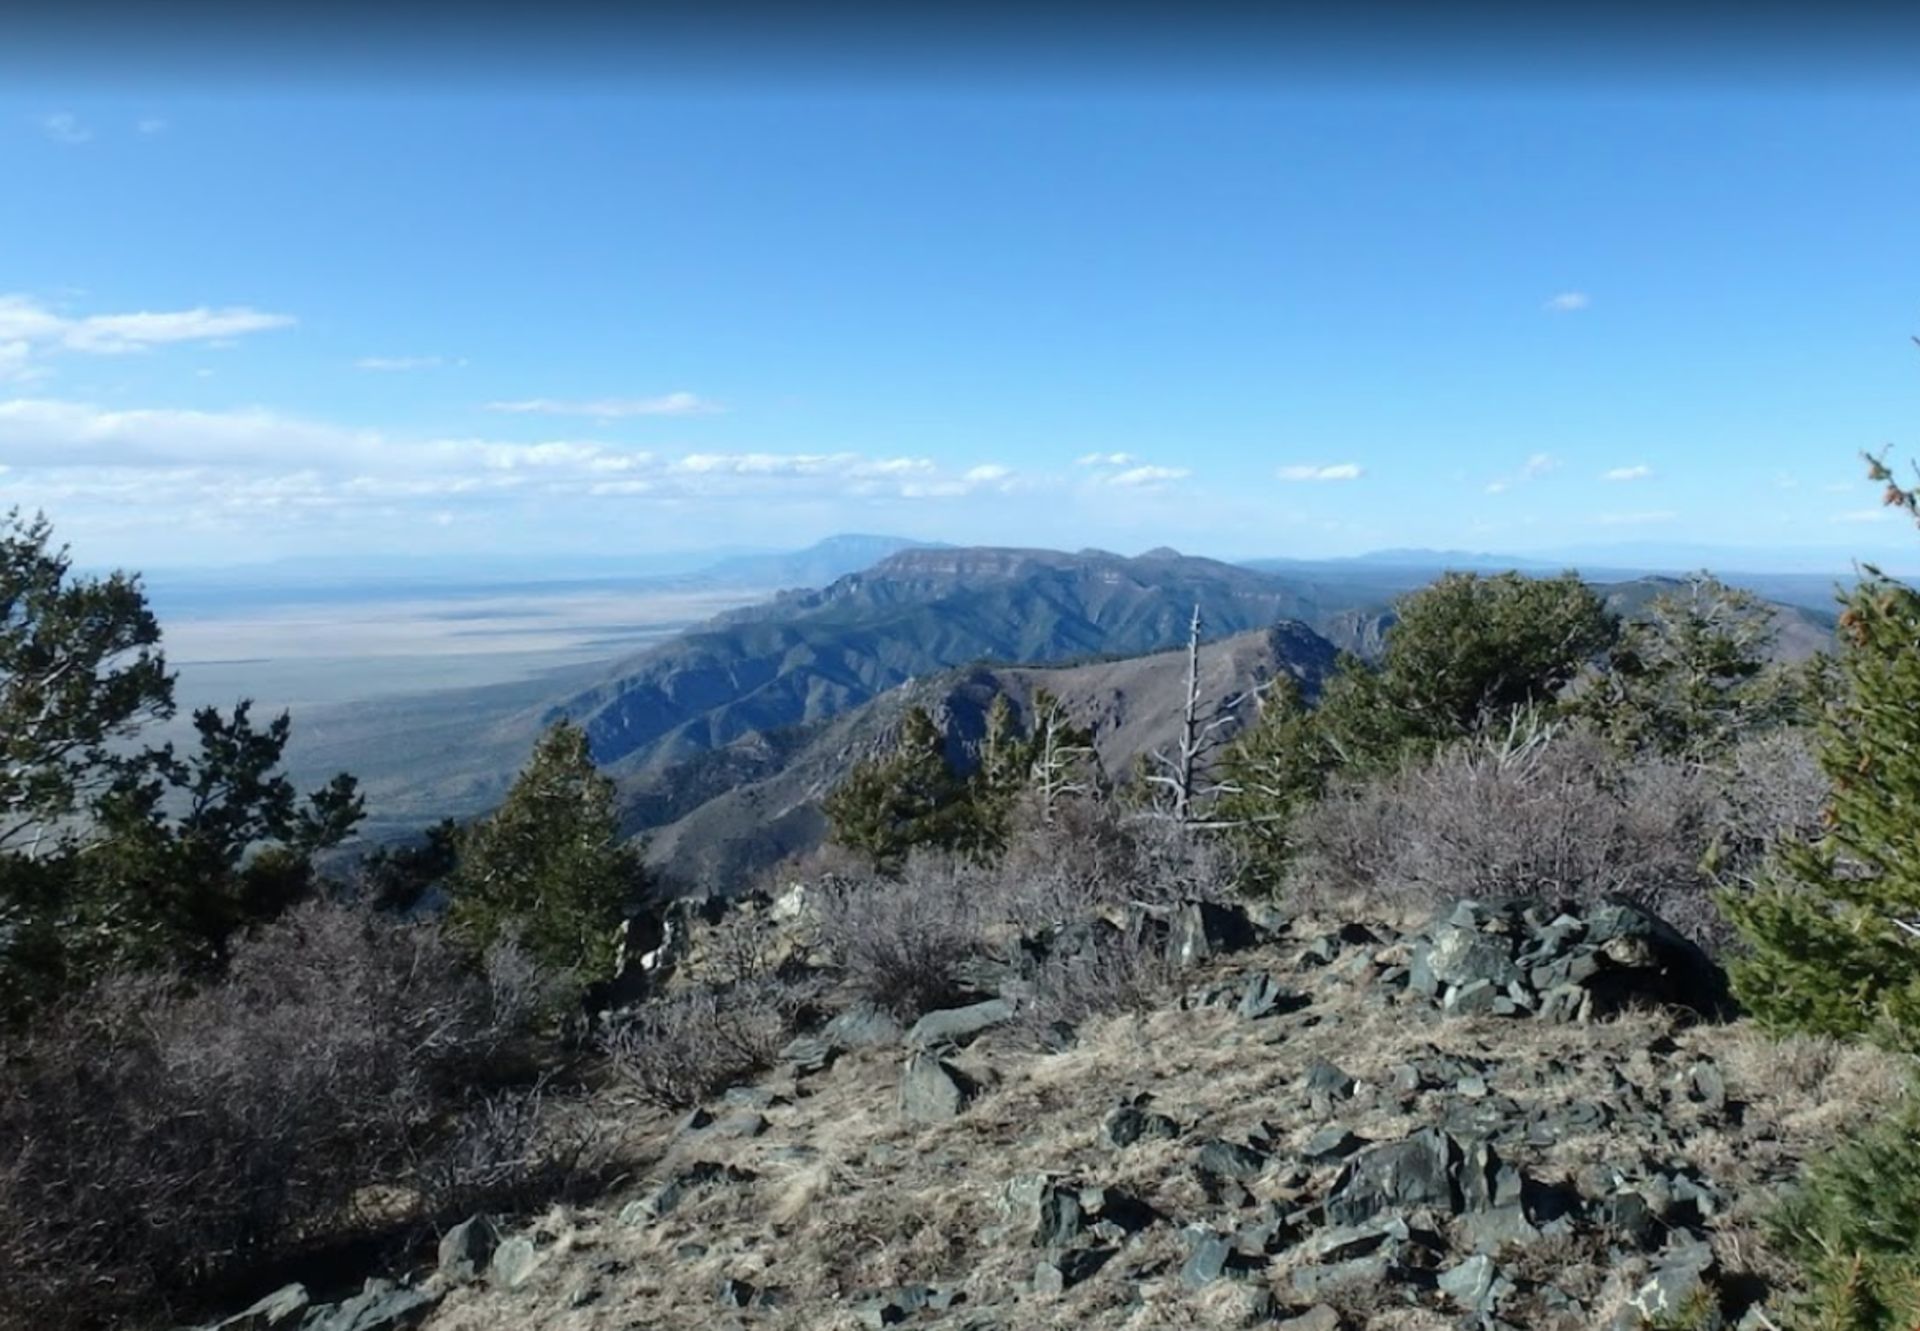 This New Mexico Mountain View Could be Yours! - Image 13 of 13